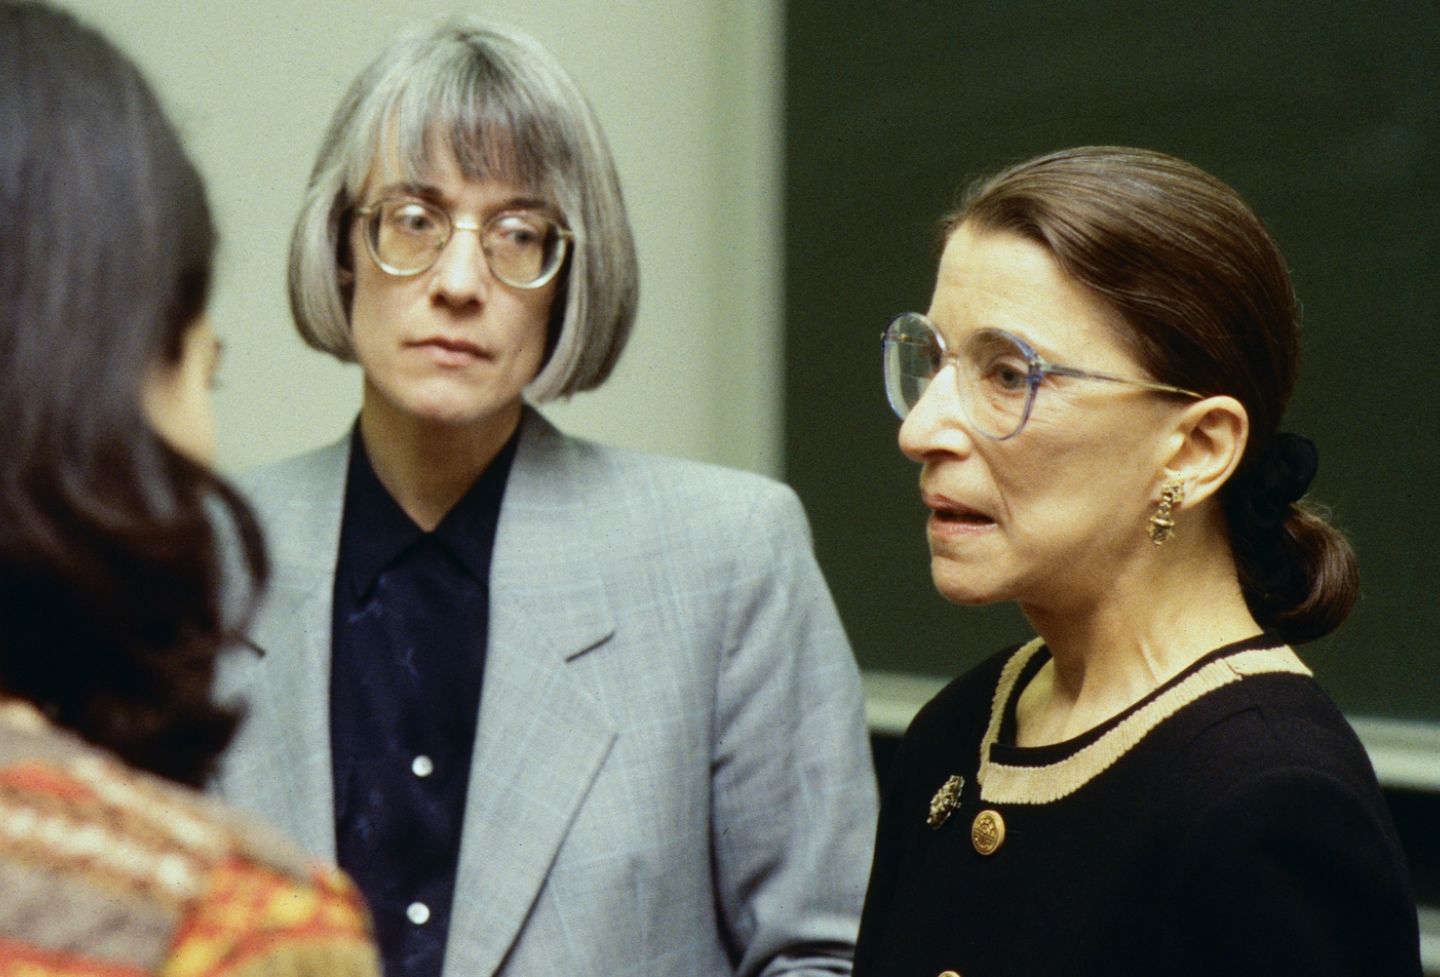 Professor Anne Coughlin and Ruth Bader Ginsburg